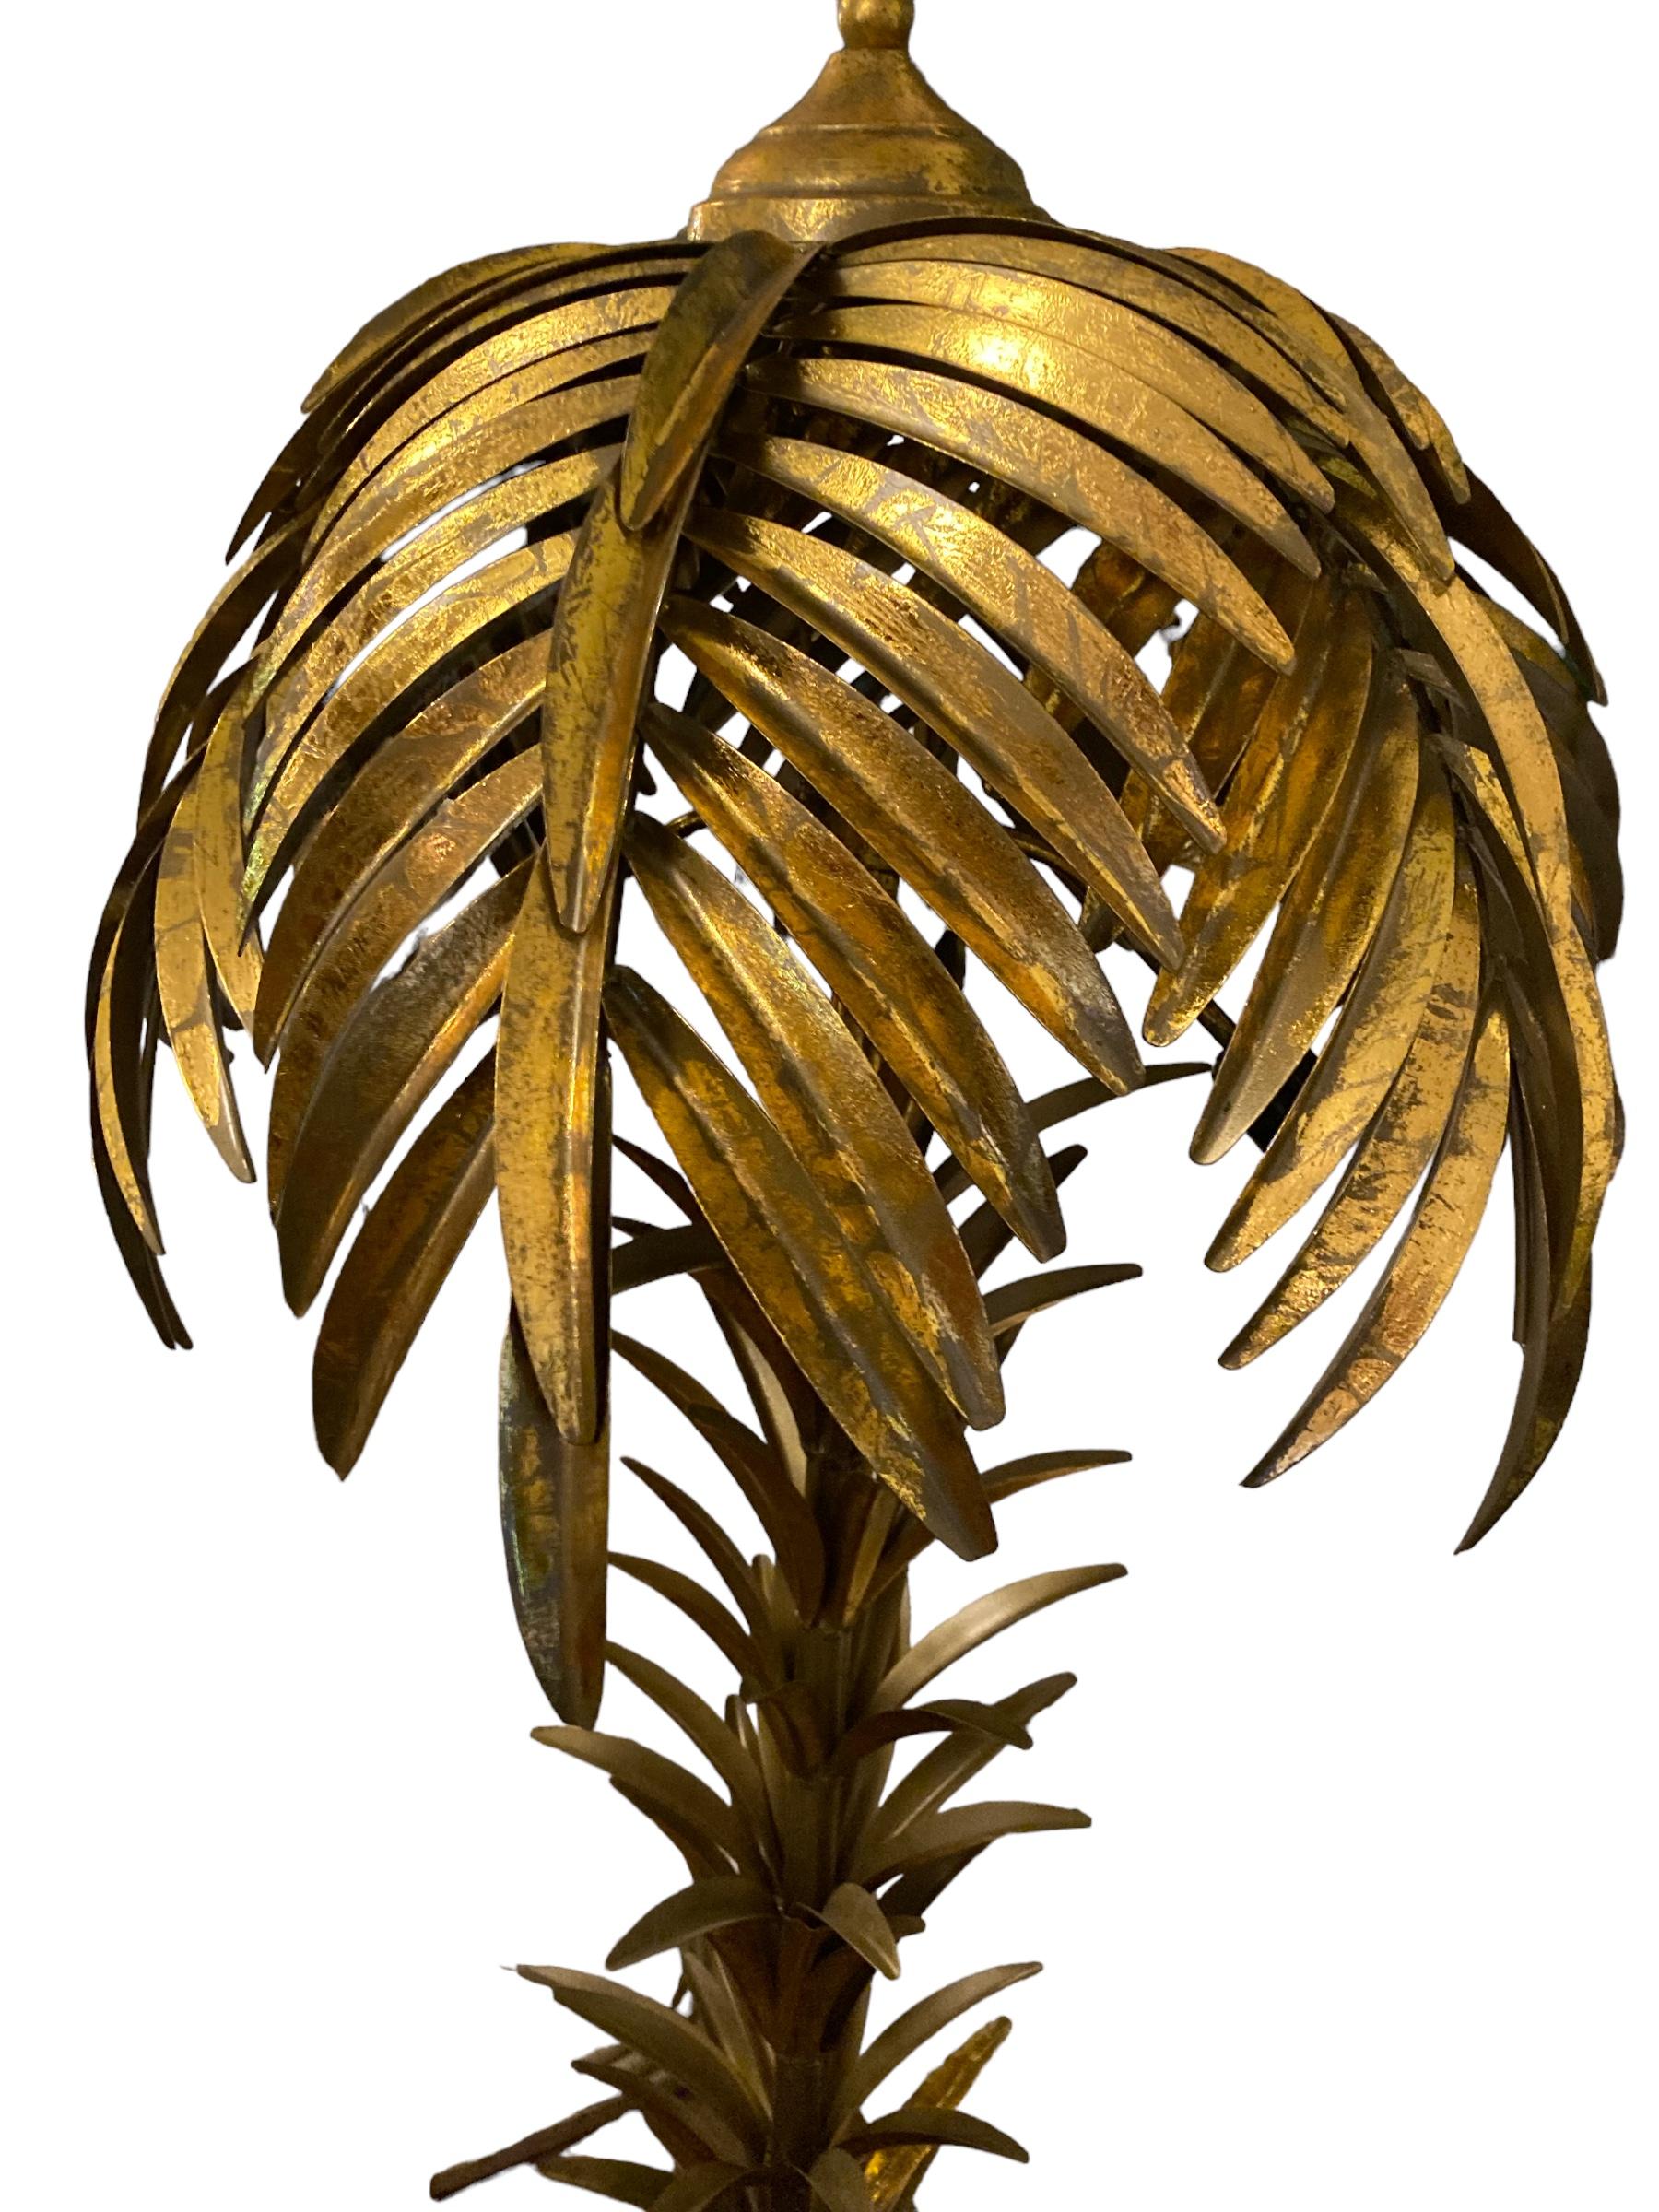 Hollywood Regency Style Gilt Metal Palm Tree Floor Lamp, Mid to late 20C For Sale 1